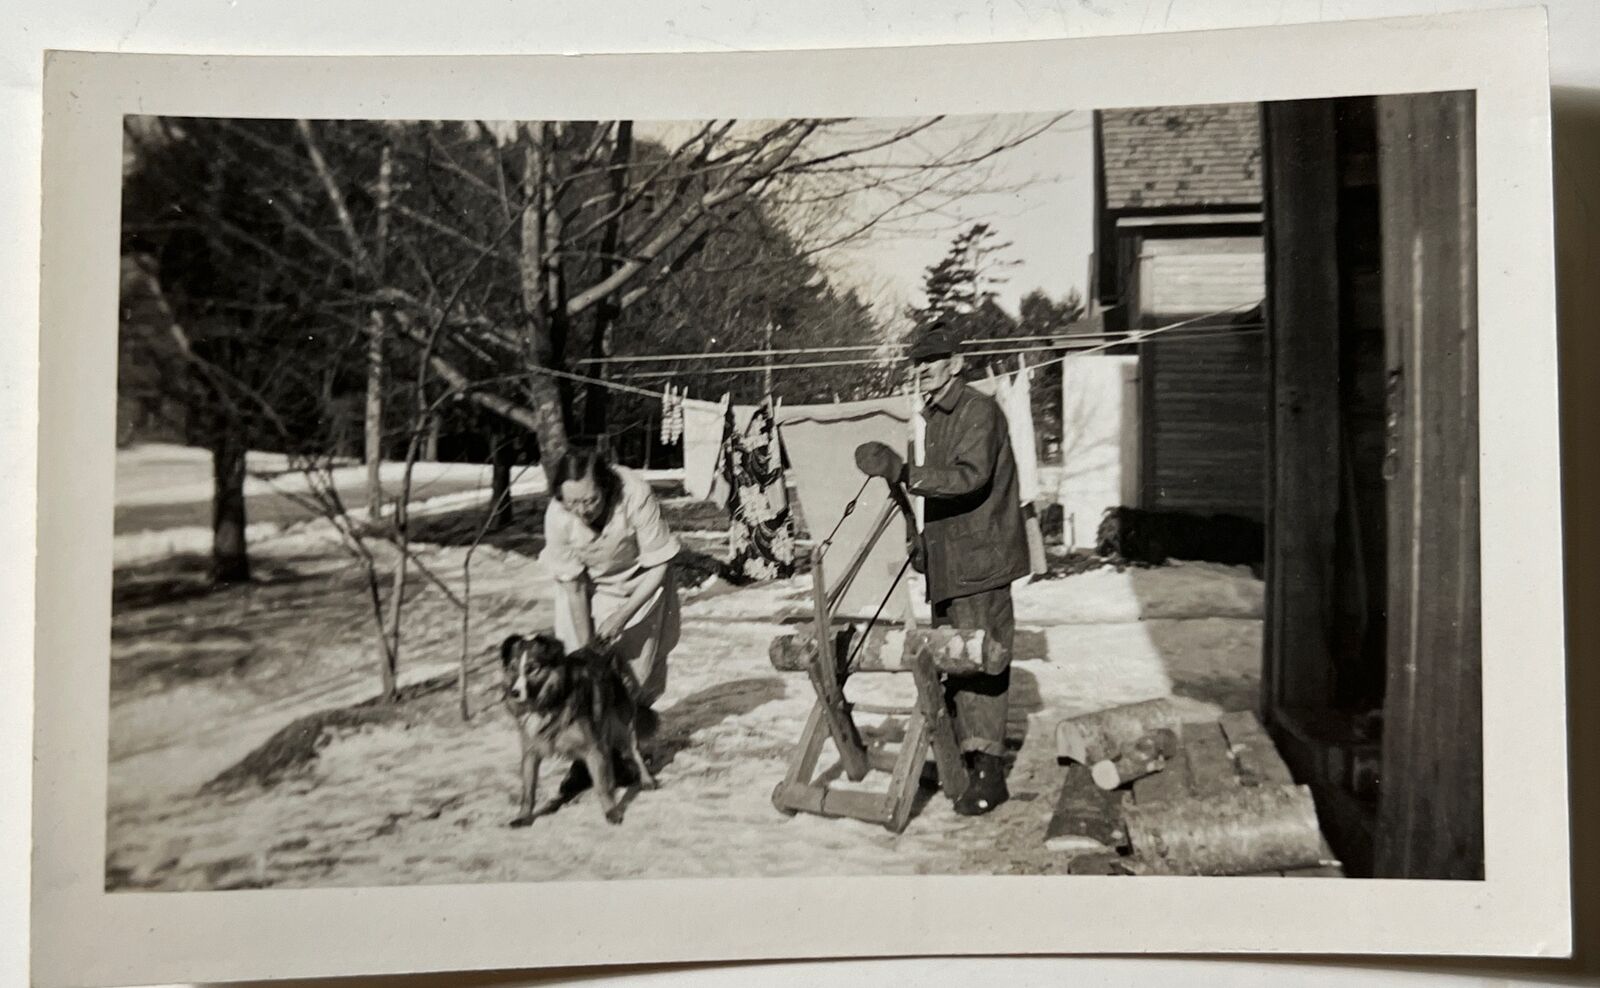 1950s SHELTIE DOG with Woman MAN sawing Logs Clothesline vintage Photo Snapshot